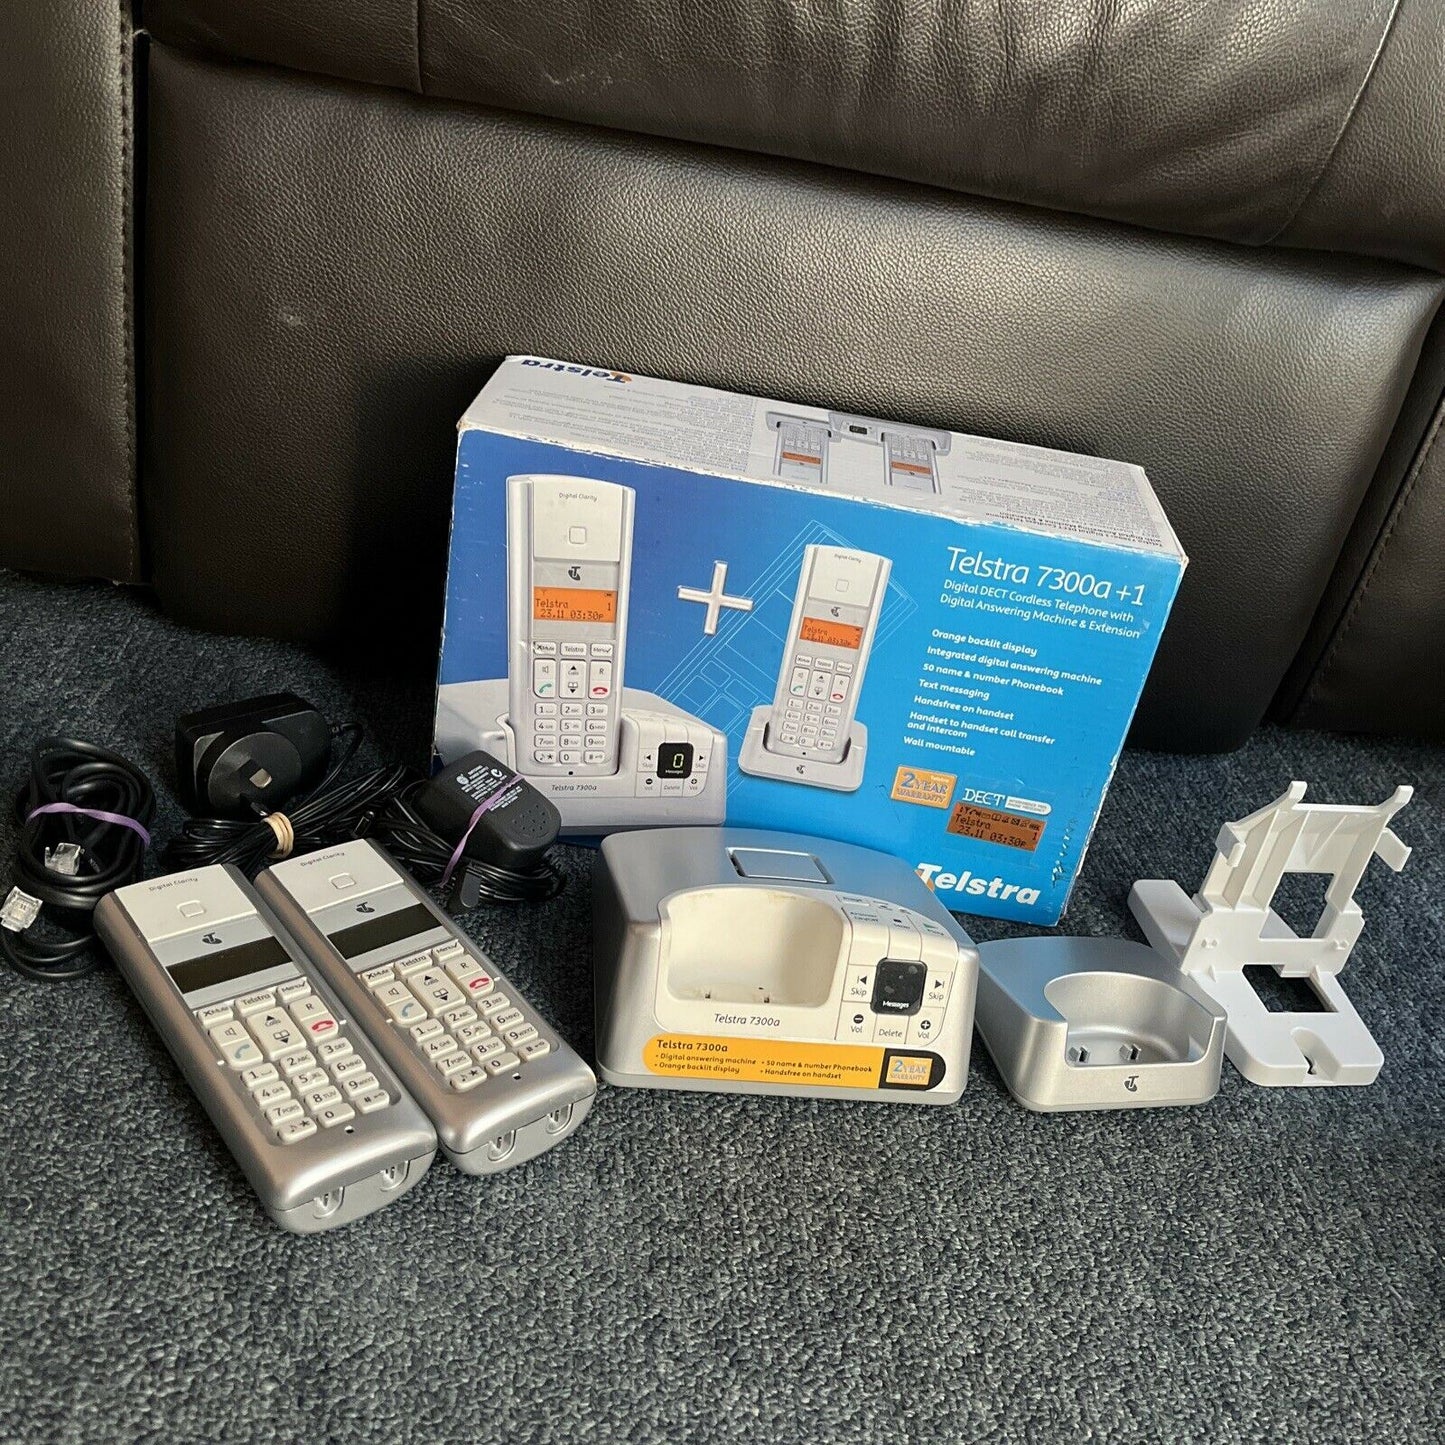 Telstra 7300a+1 DECT Cordless Telephone - Working but need Batteries